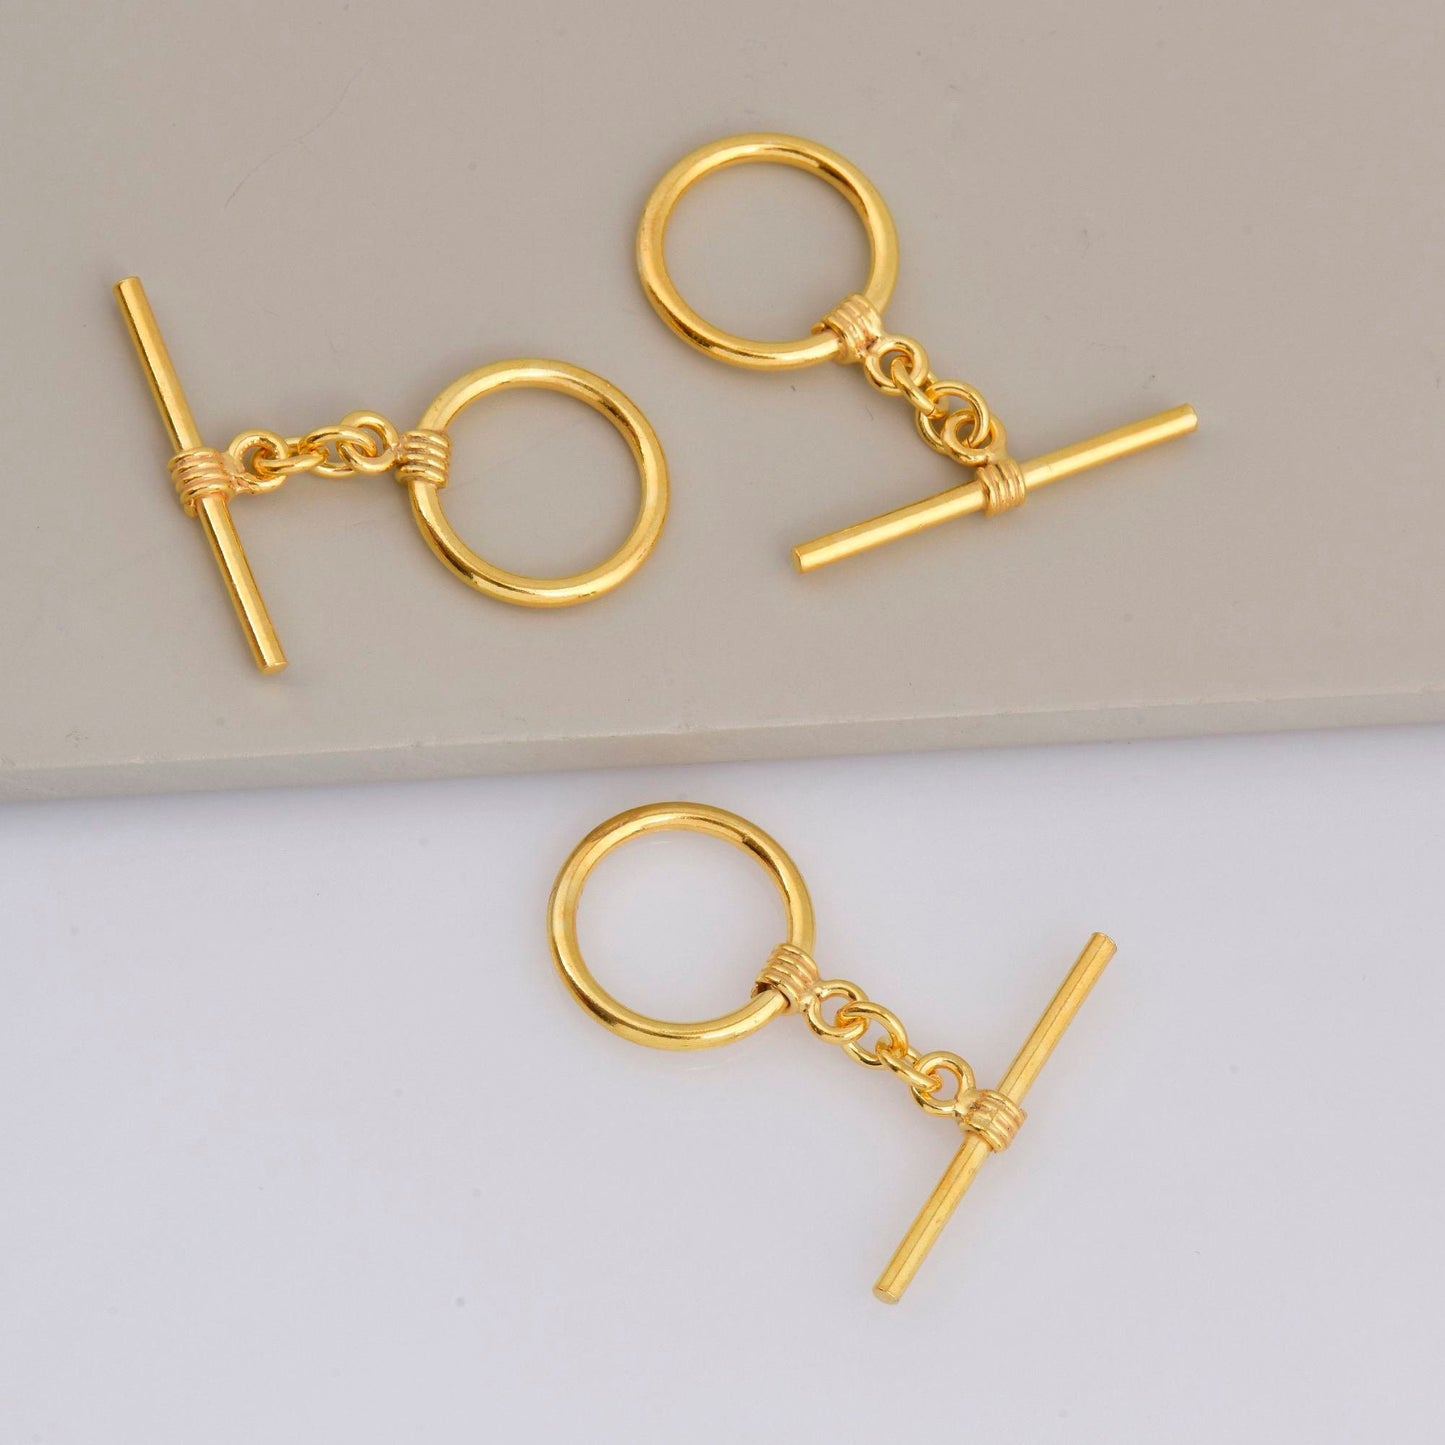 24K Gold Vermeil Toggle Clasps, Solid Silver Toggle Clasp, 24K Gold Plated Antique Toggle Clasp Set, Jewelry Supply, Jewelry Findings, MVM60